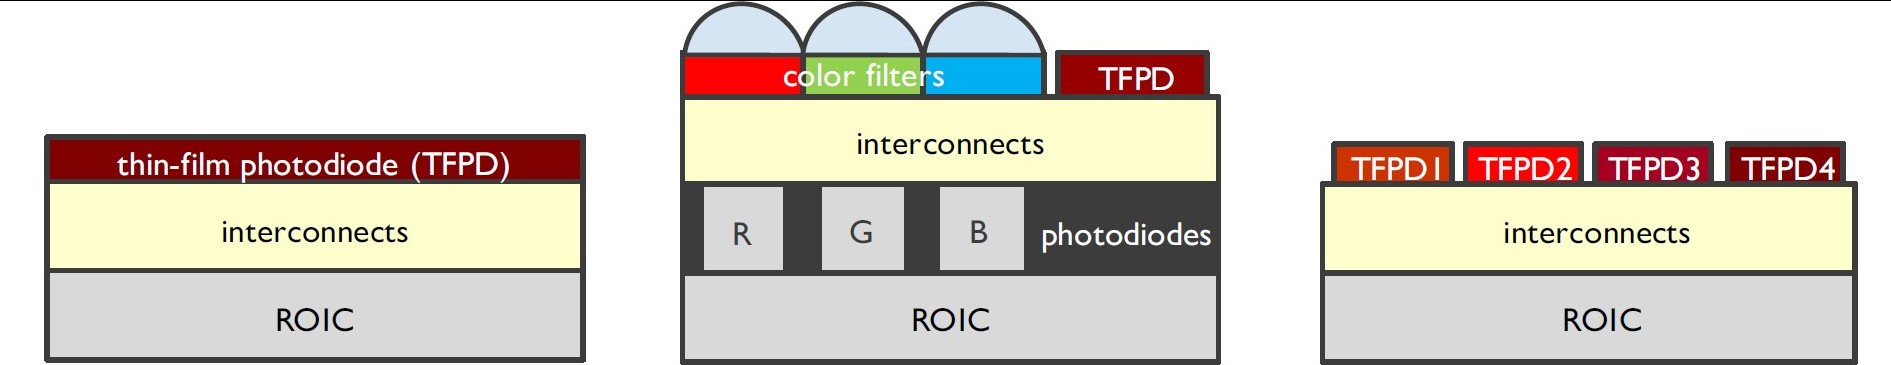 Schematic illustration of the design choices targeting imec’s progressive application roadmap. Left: basic IR-detector; Middle: IR detection integrated in visible-light imager; Right: multispectral IR detection thanks to tunable TFPD layers.